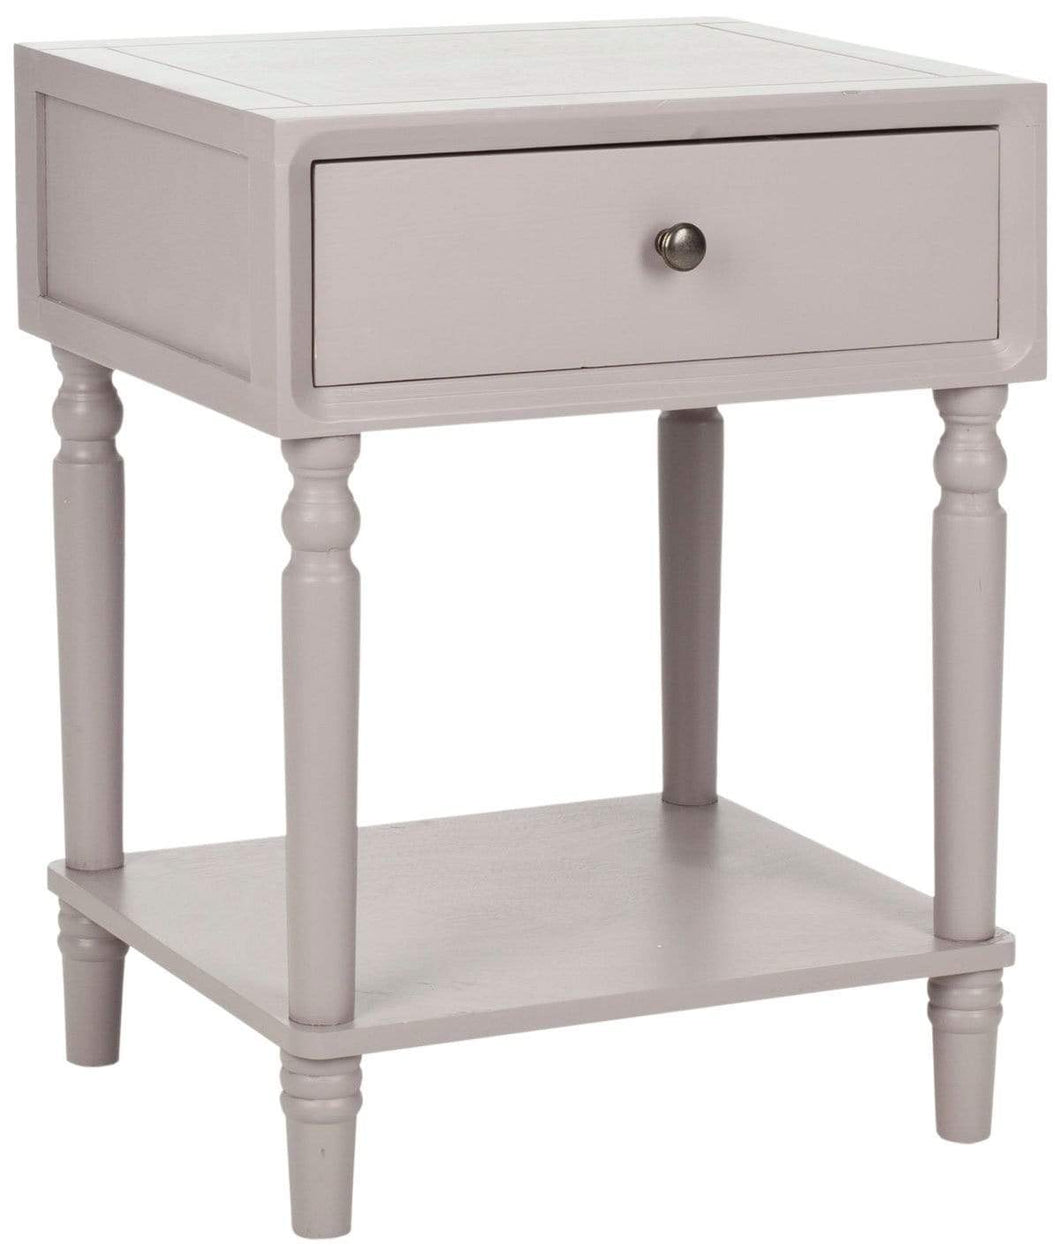 Safavieh Night Stands Ash Grey Safavieh Siobhan Accent Table With Storage Drawer